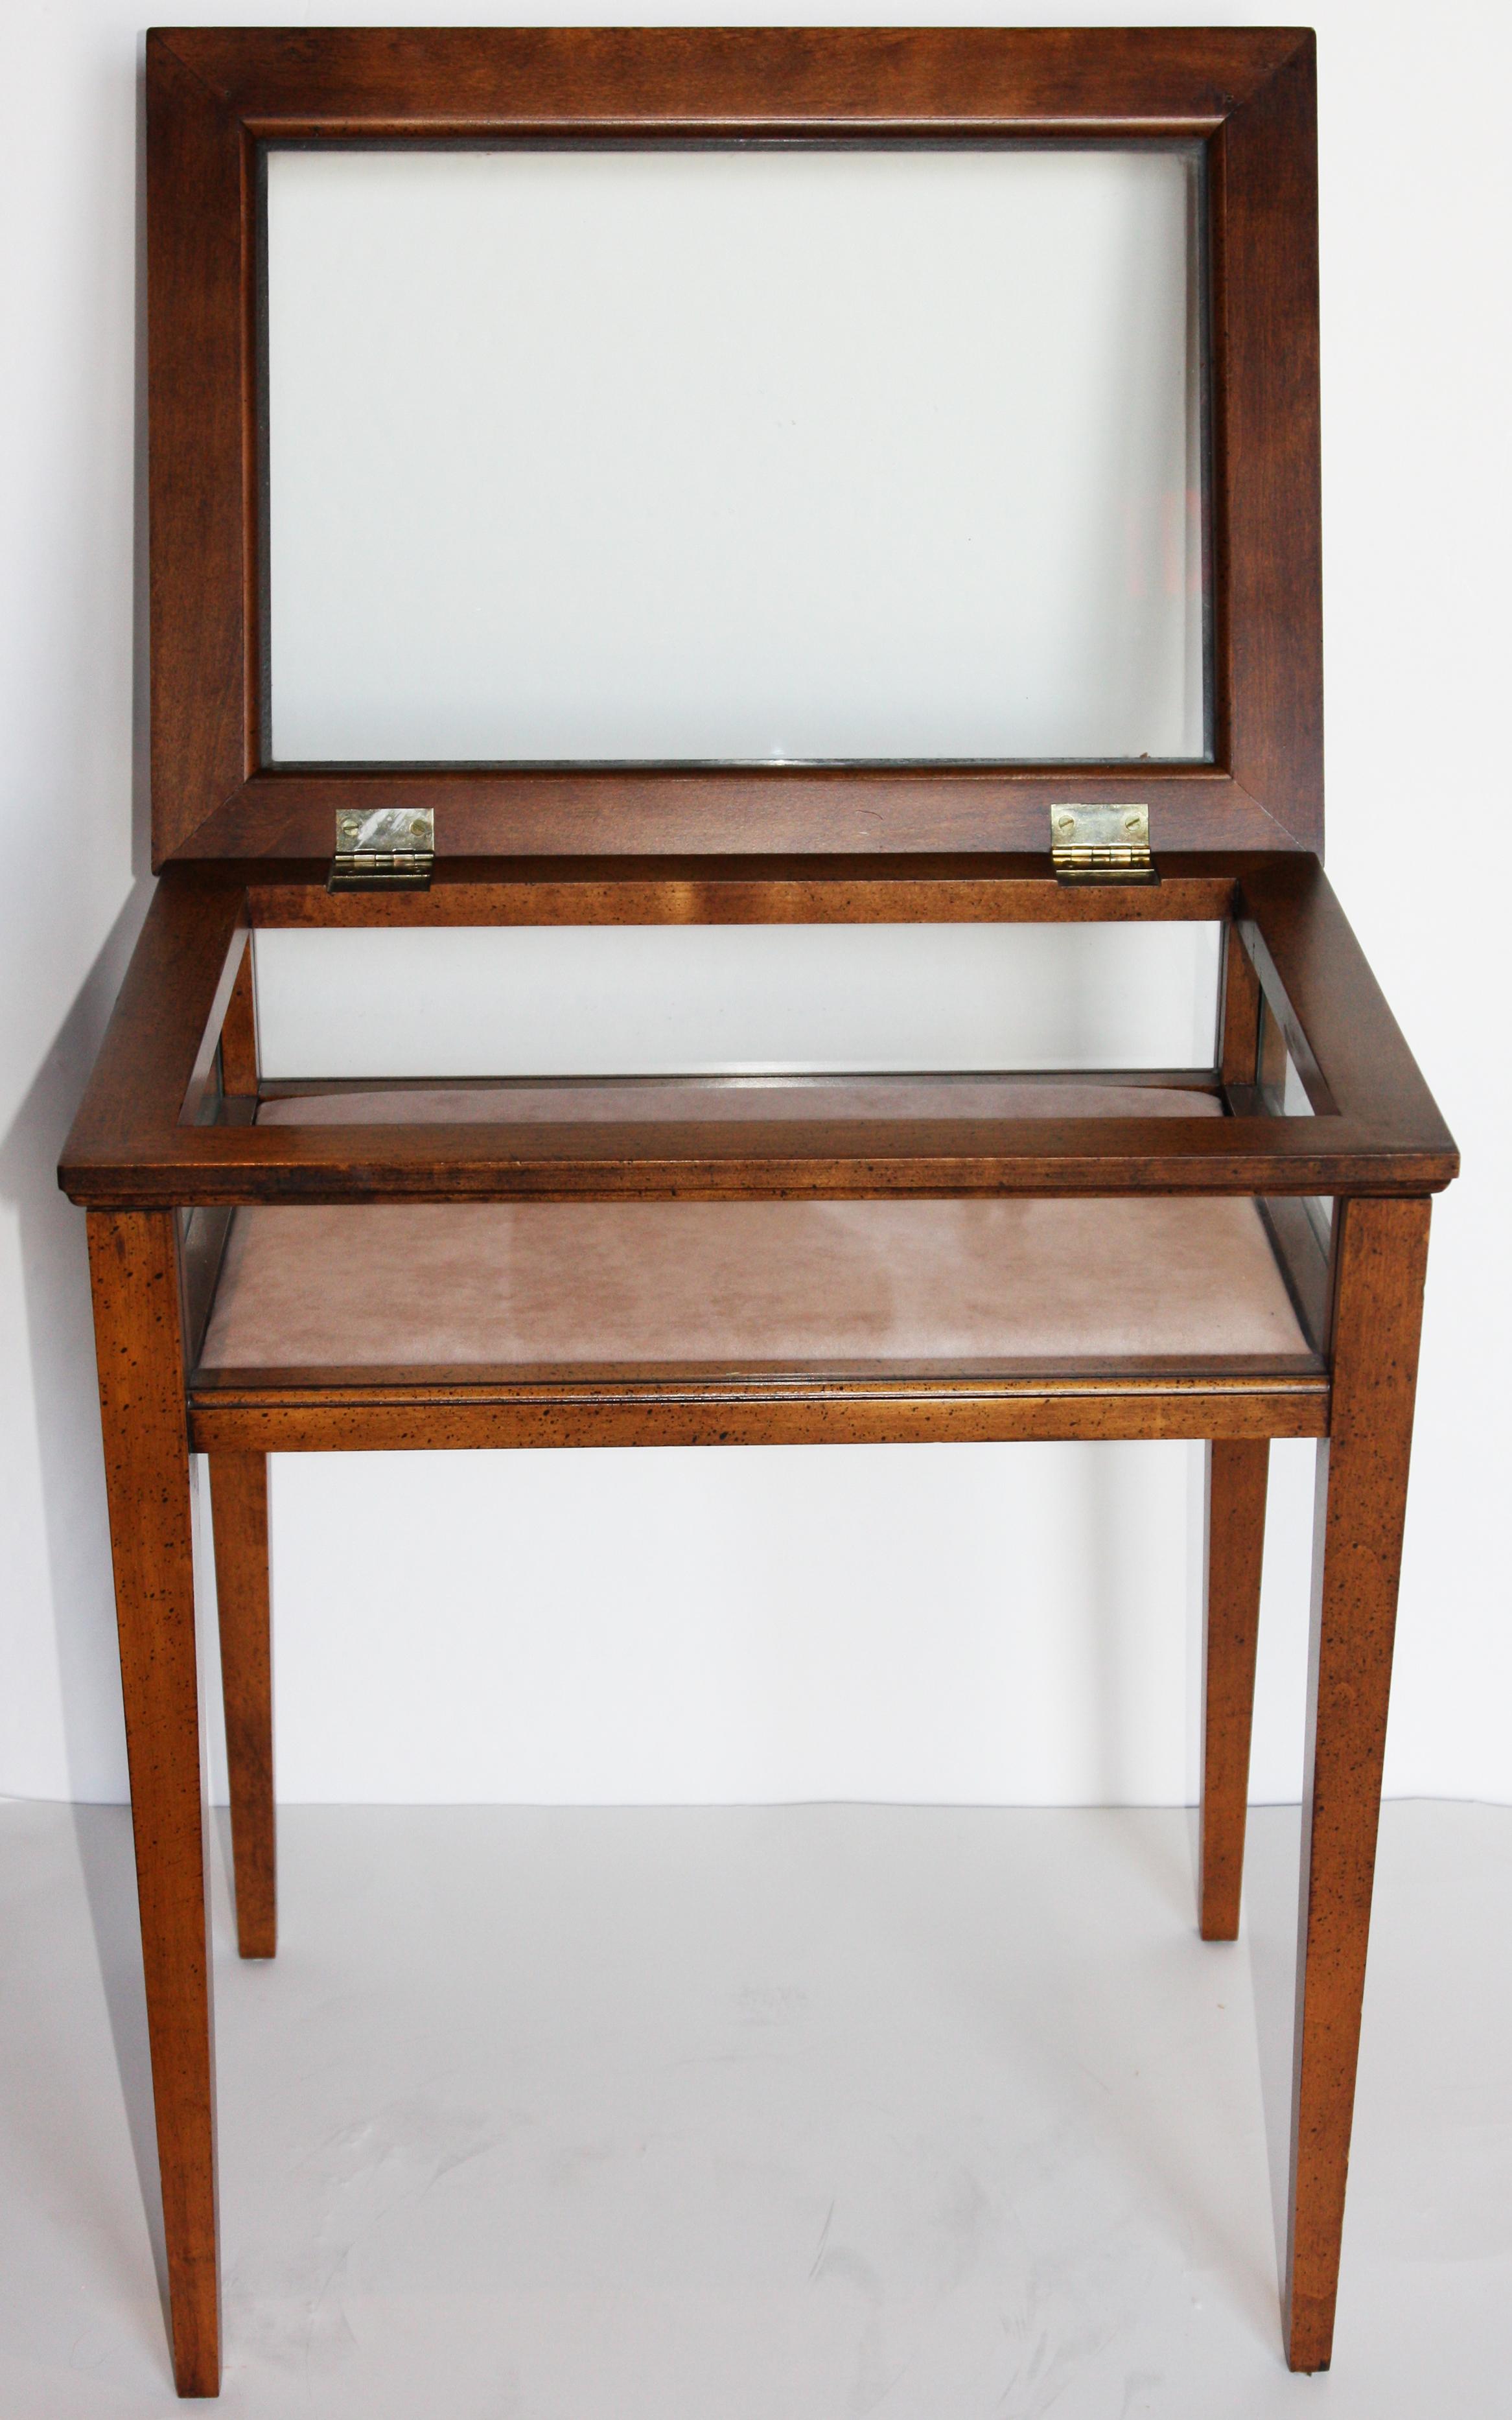 A beautifully made Brandt vitrine with hinged top and upholstered glass display case. Brandt makers tags are shown on the bottom of the piece.